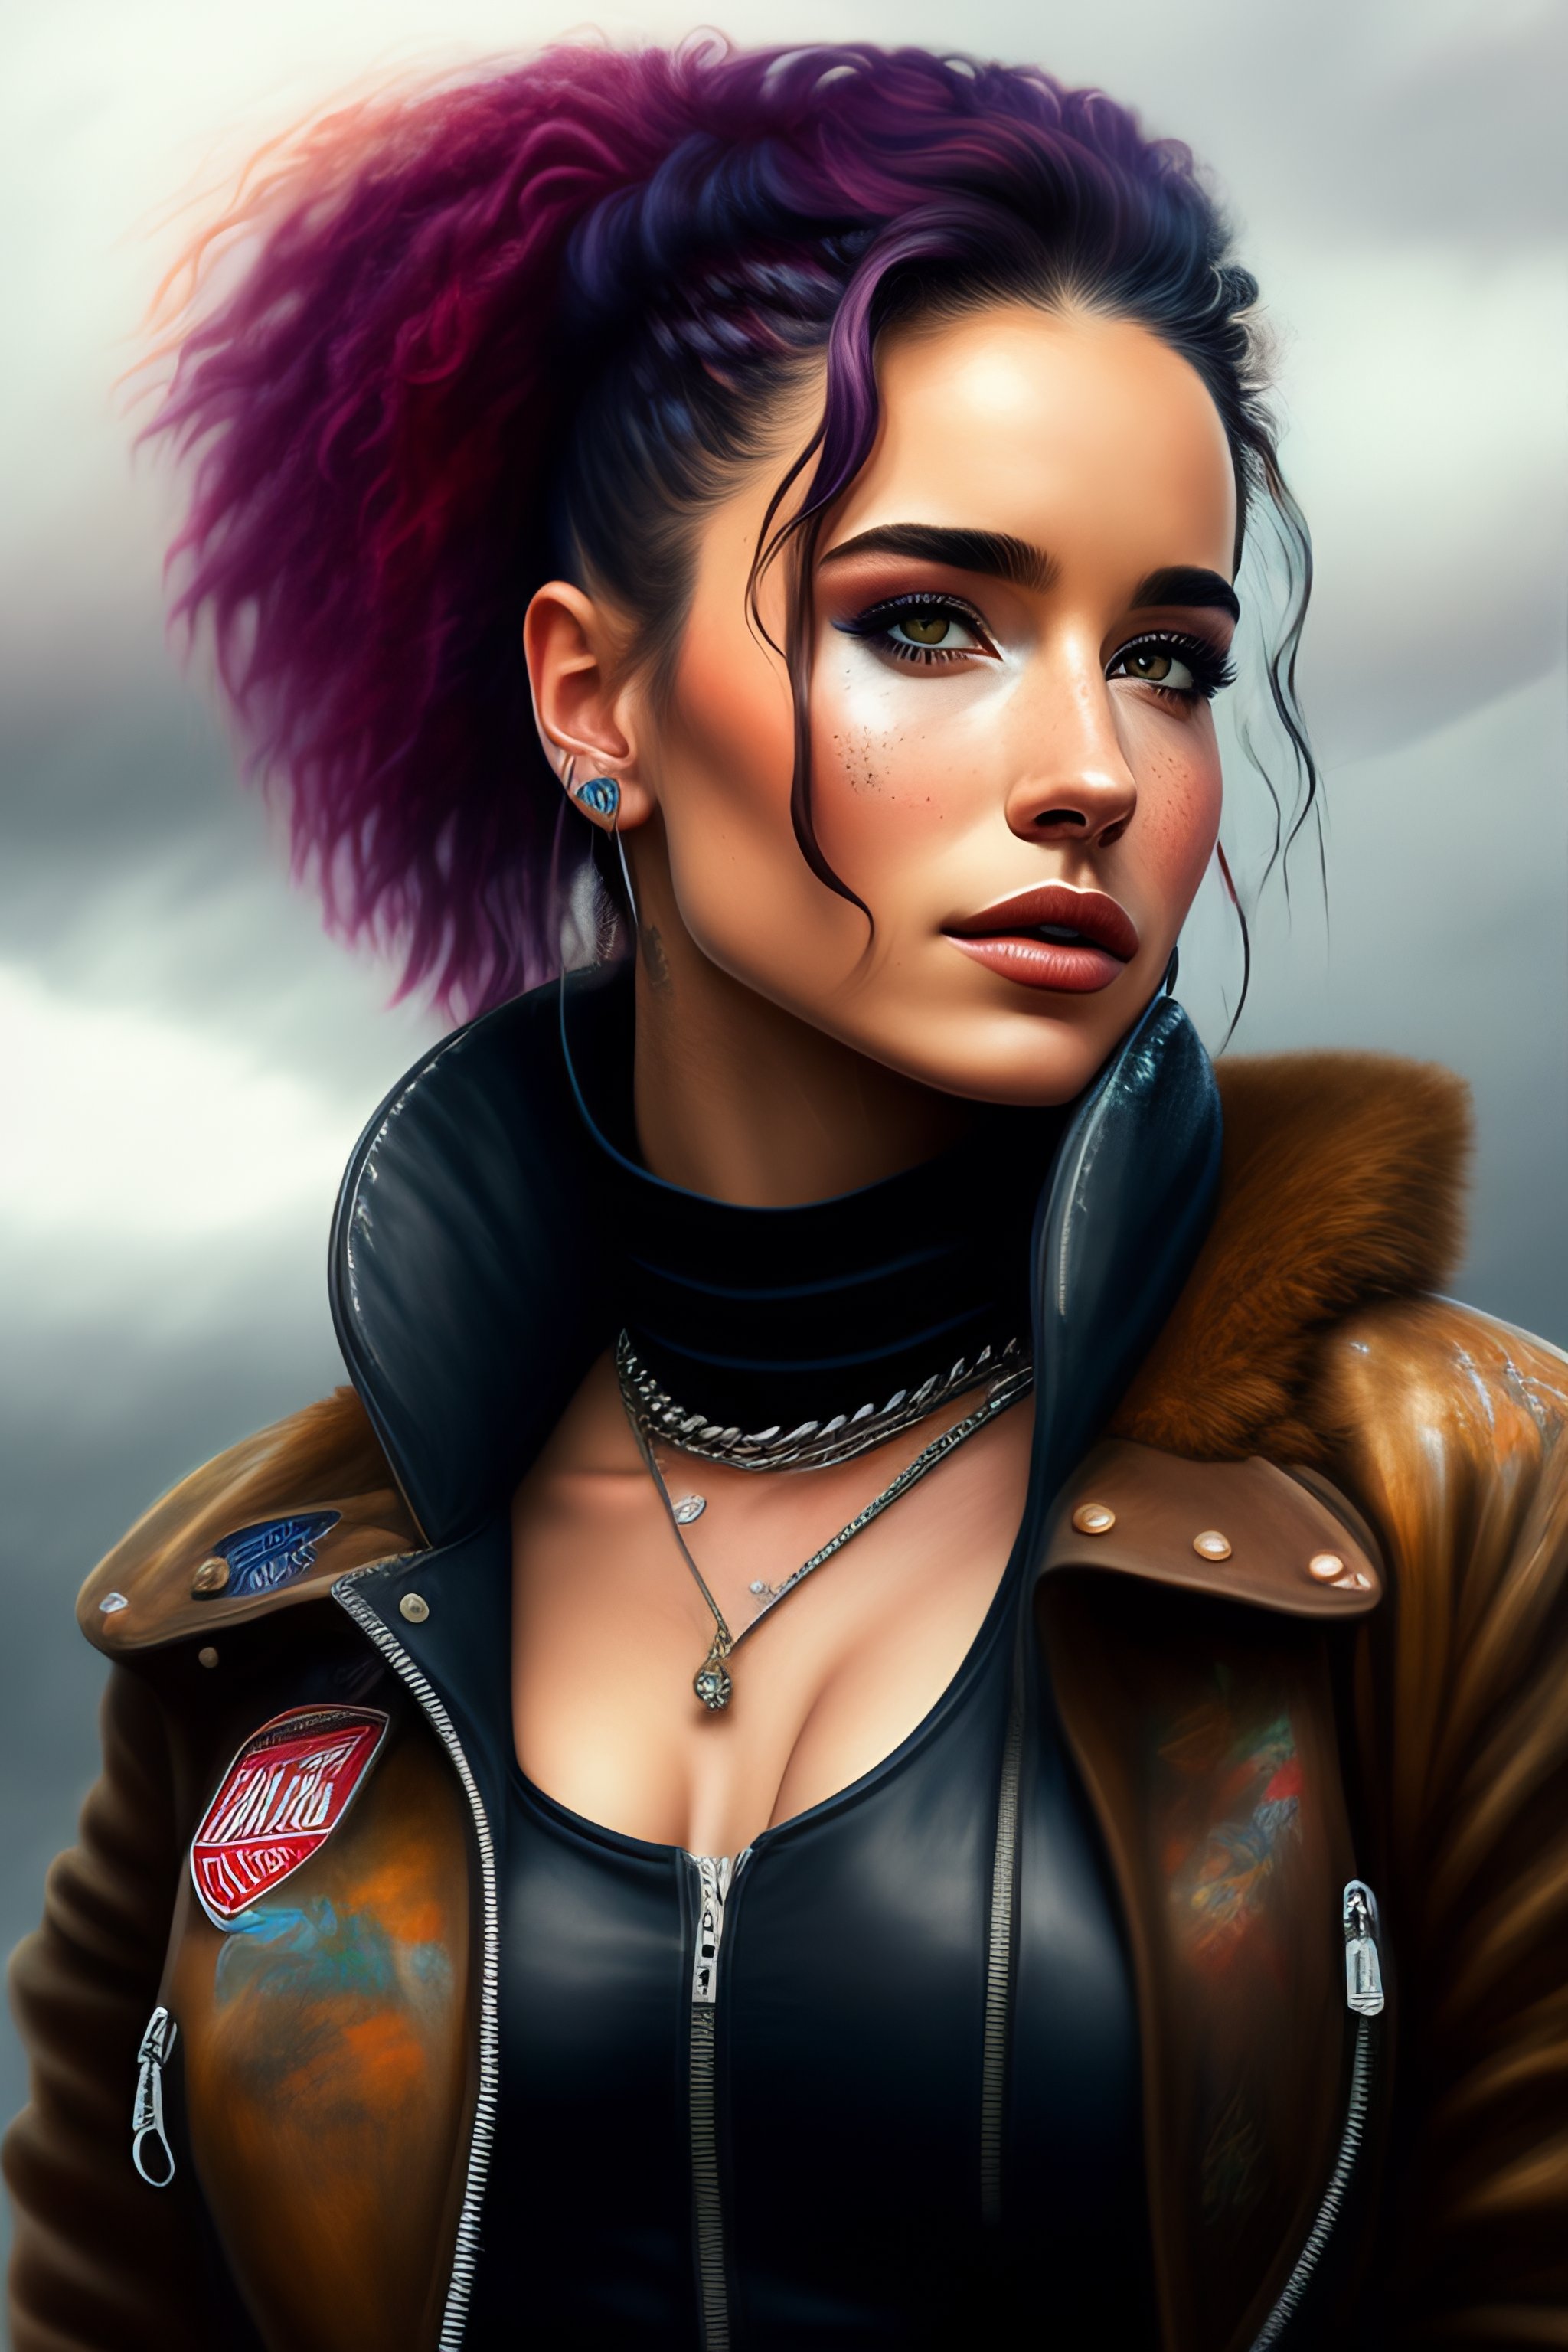 Lexica - Cute punk rock girl, mad max jacket, renaissance, cables on ...